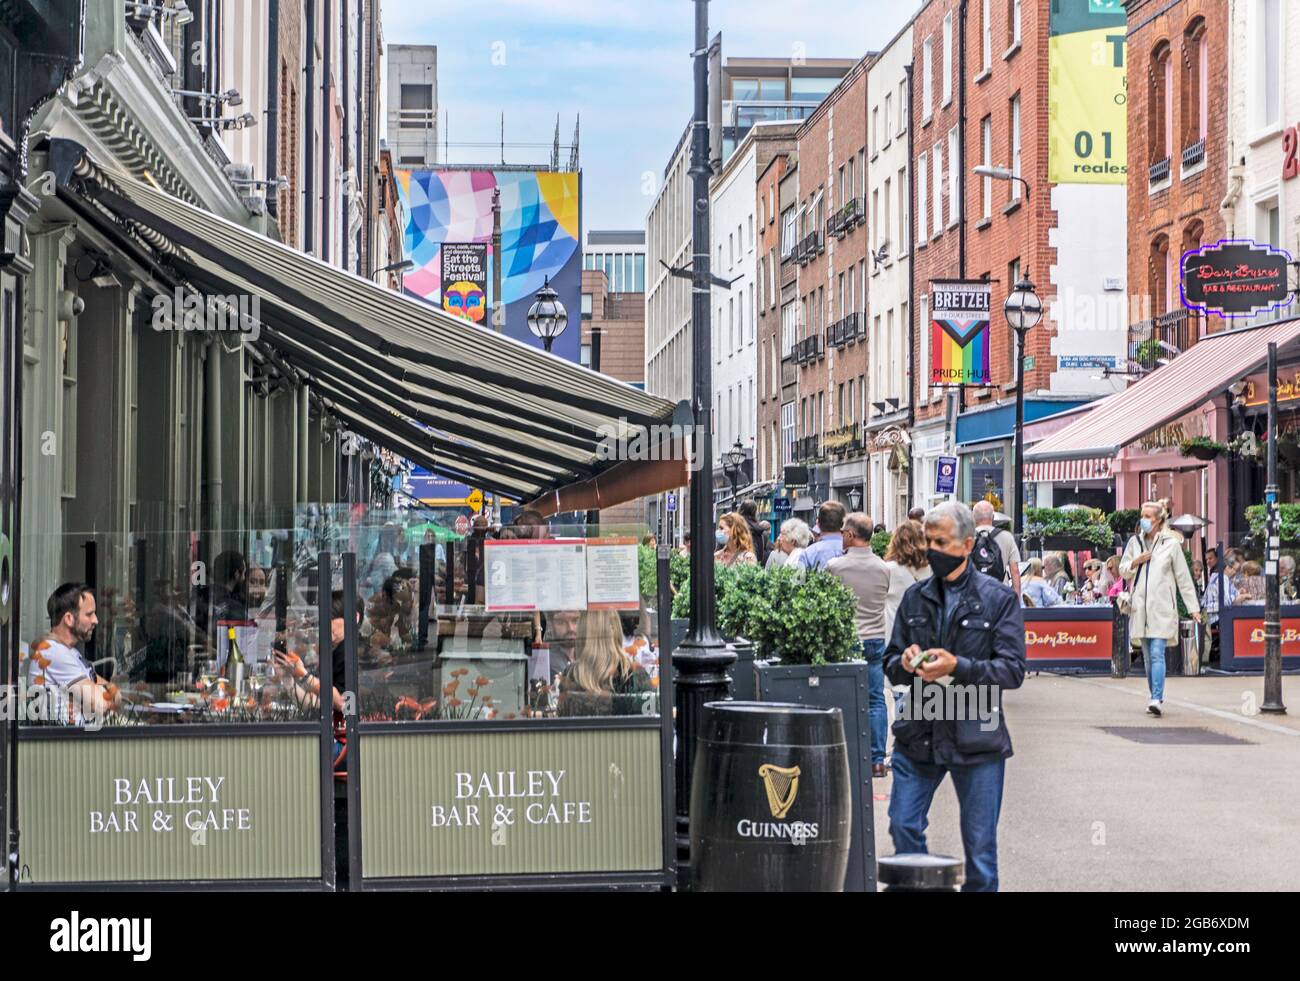 Outdoor dining in Duke Street in Dublin, Ireland. Parts of the street has been pedestrianised to encourage outdoor dining as a covid related measure Stock Photo